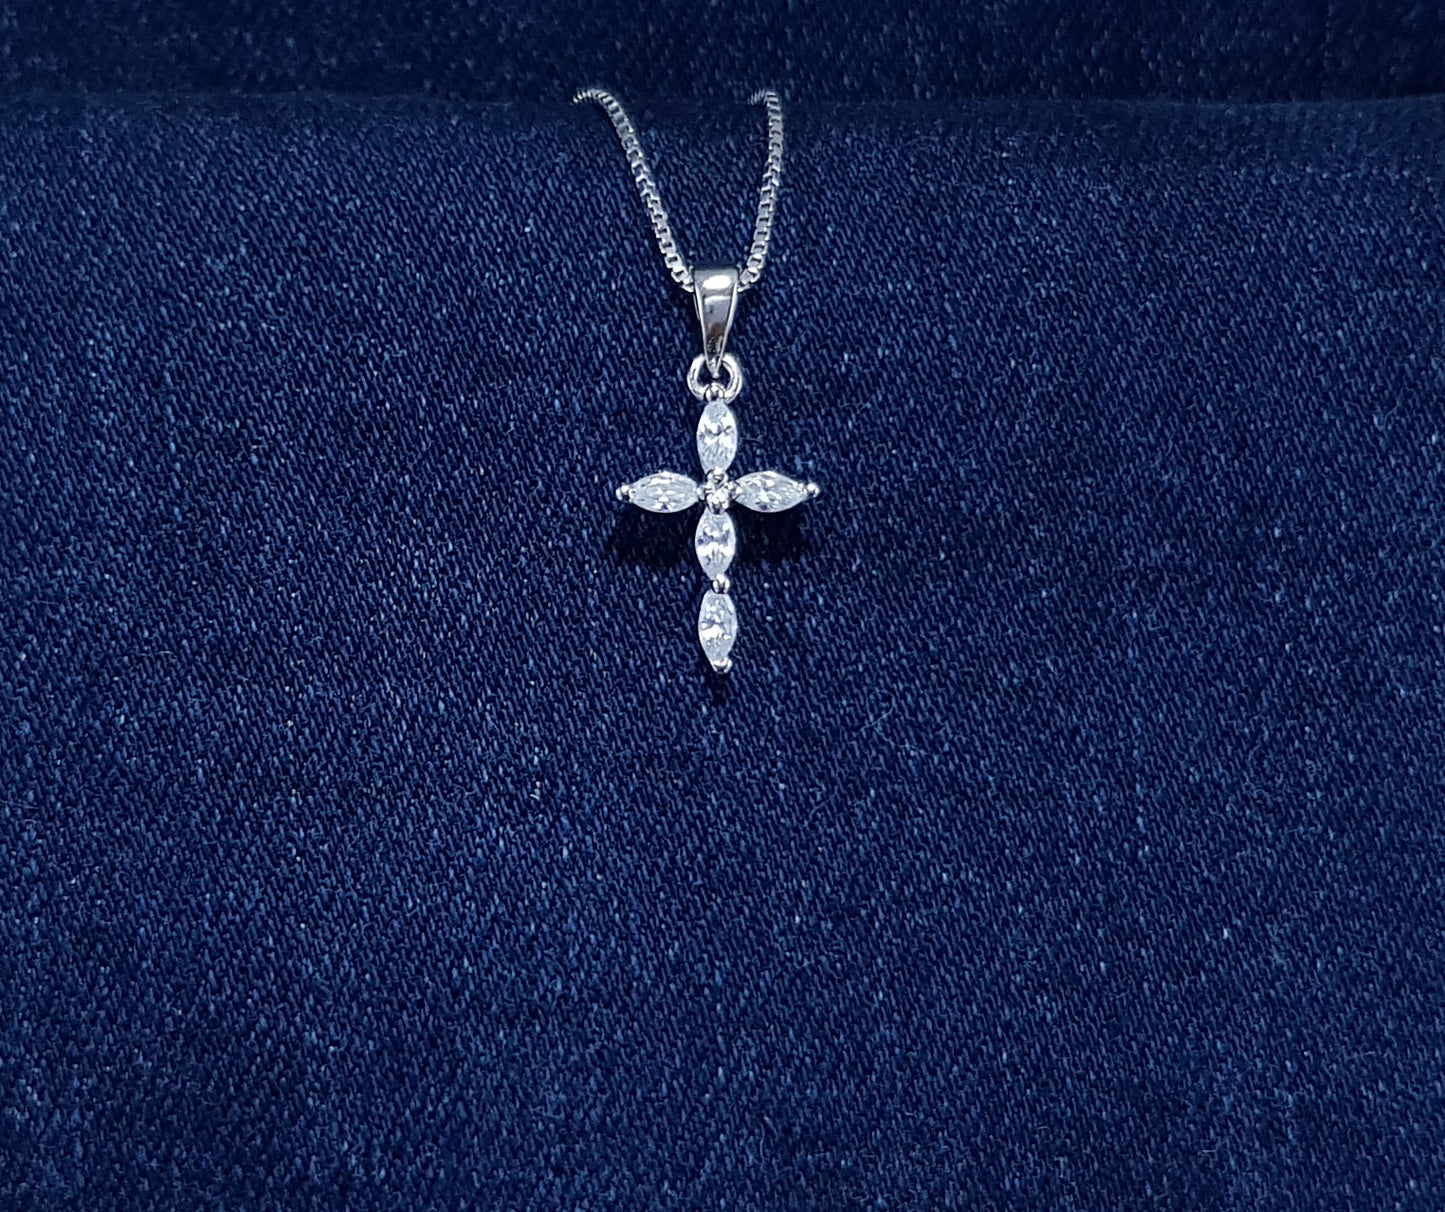 Small Sterling Silver Cross with Cubic Zirconia Stones